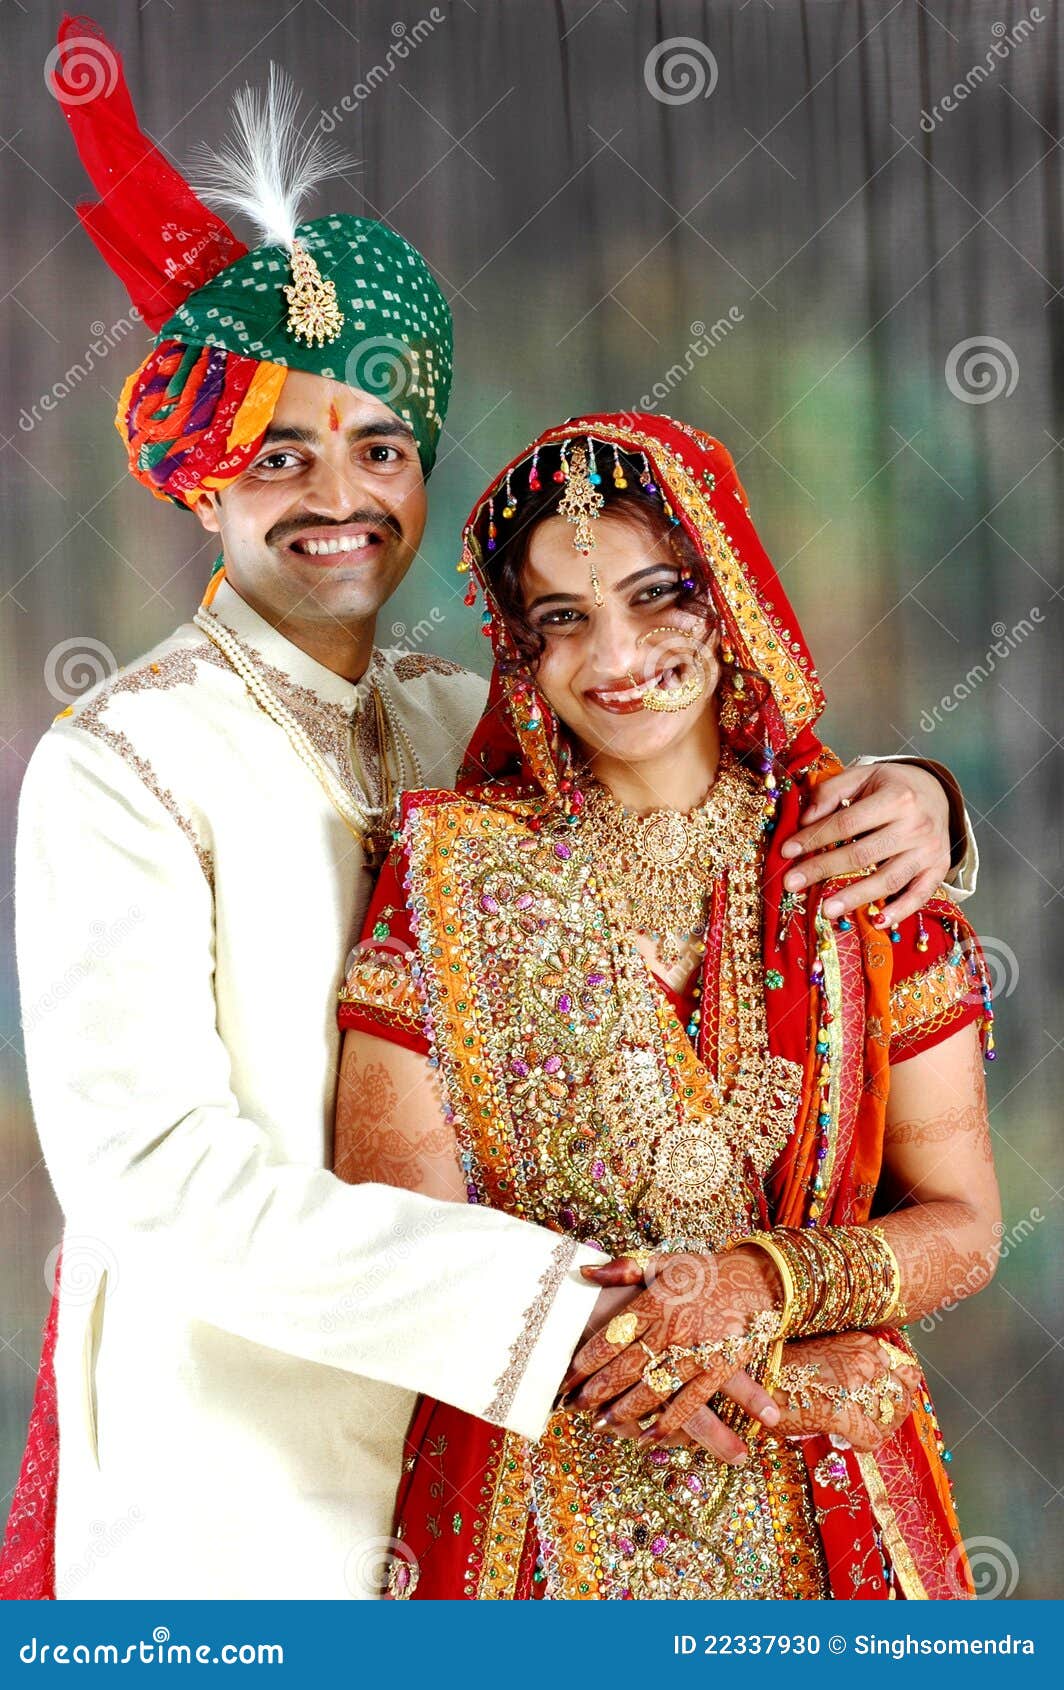 Very Happy Indian Couple on Their Wedding Day Stock Photo - Image ...